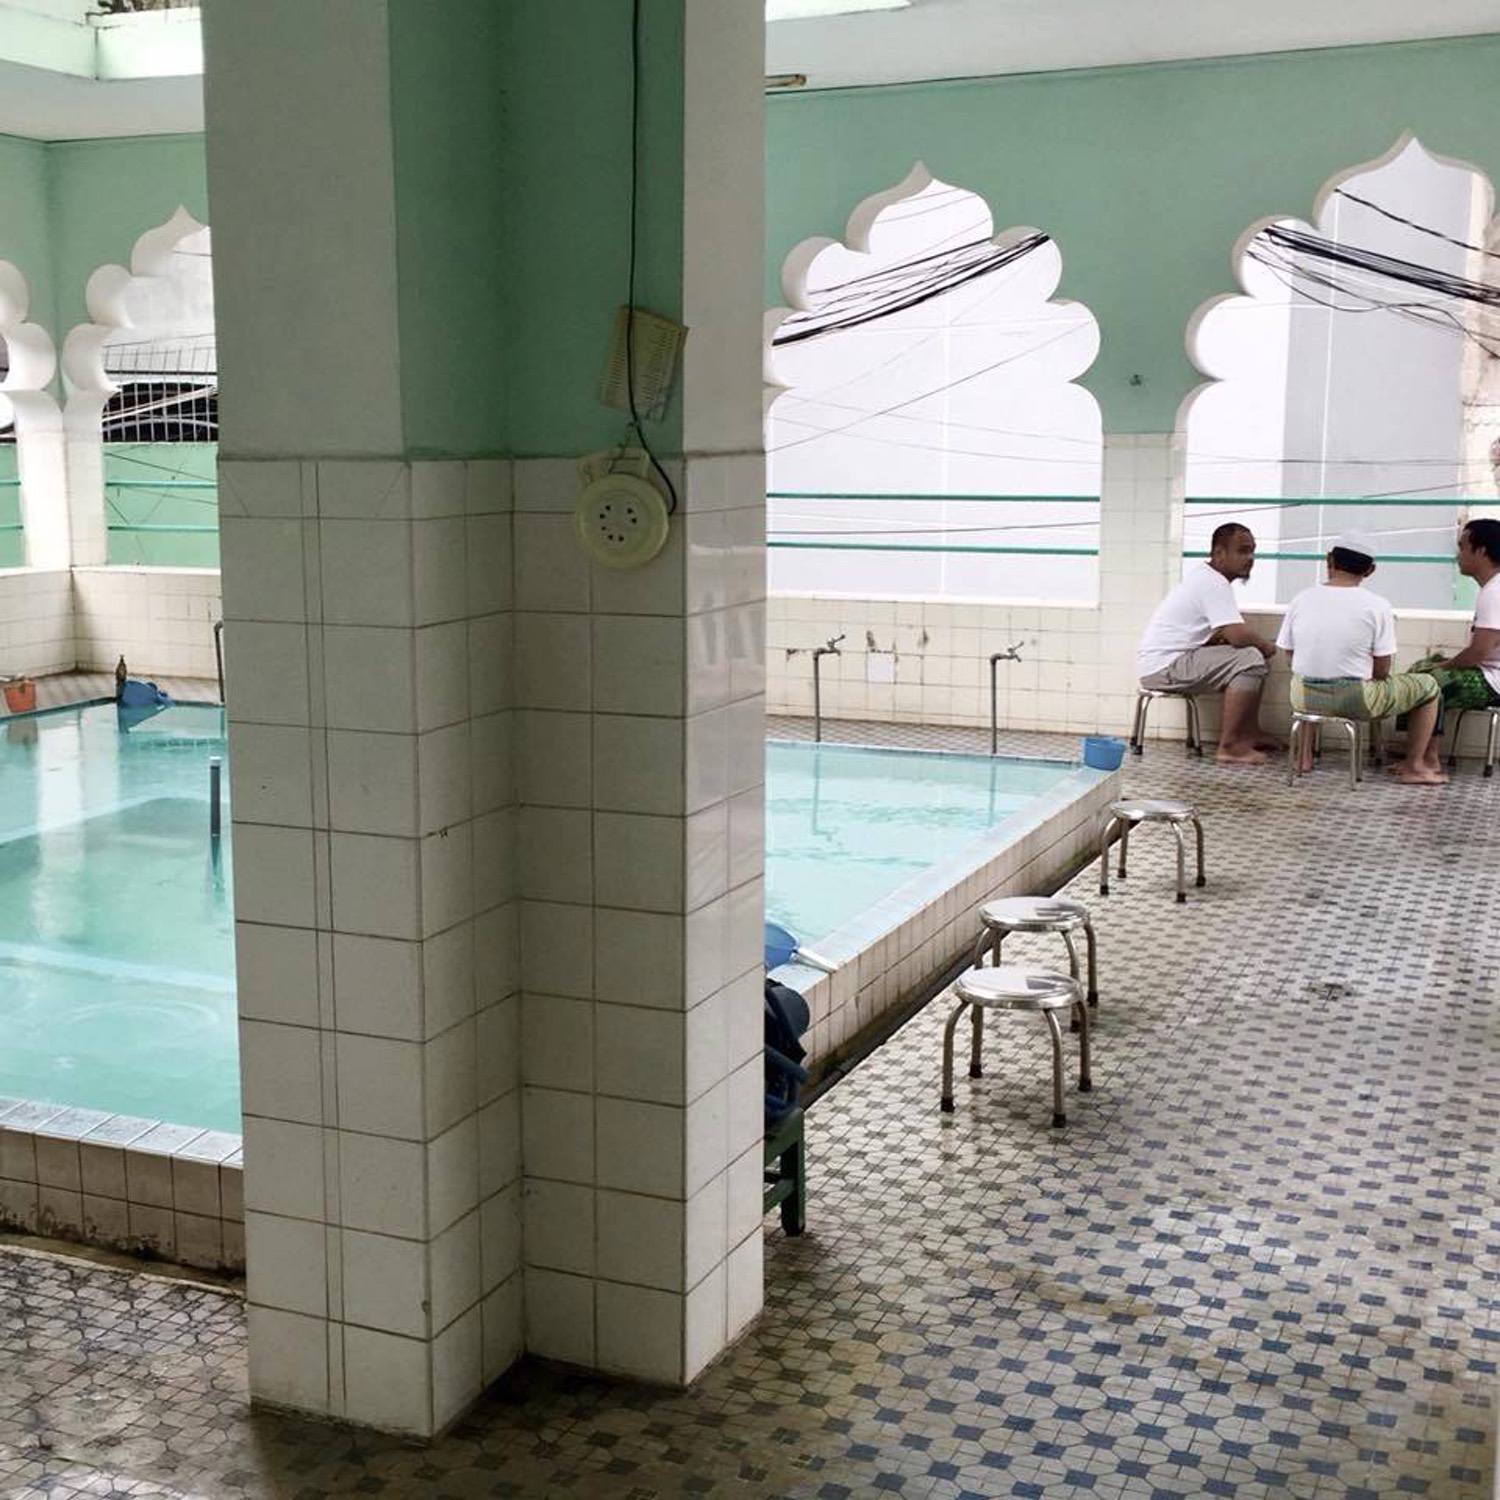 Interior view of the ablutions pool